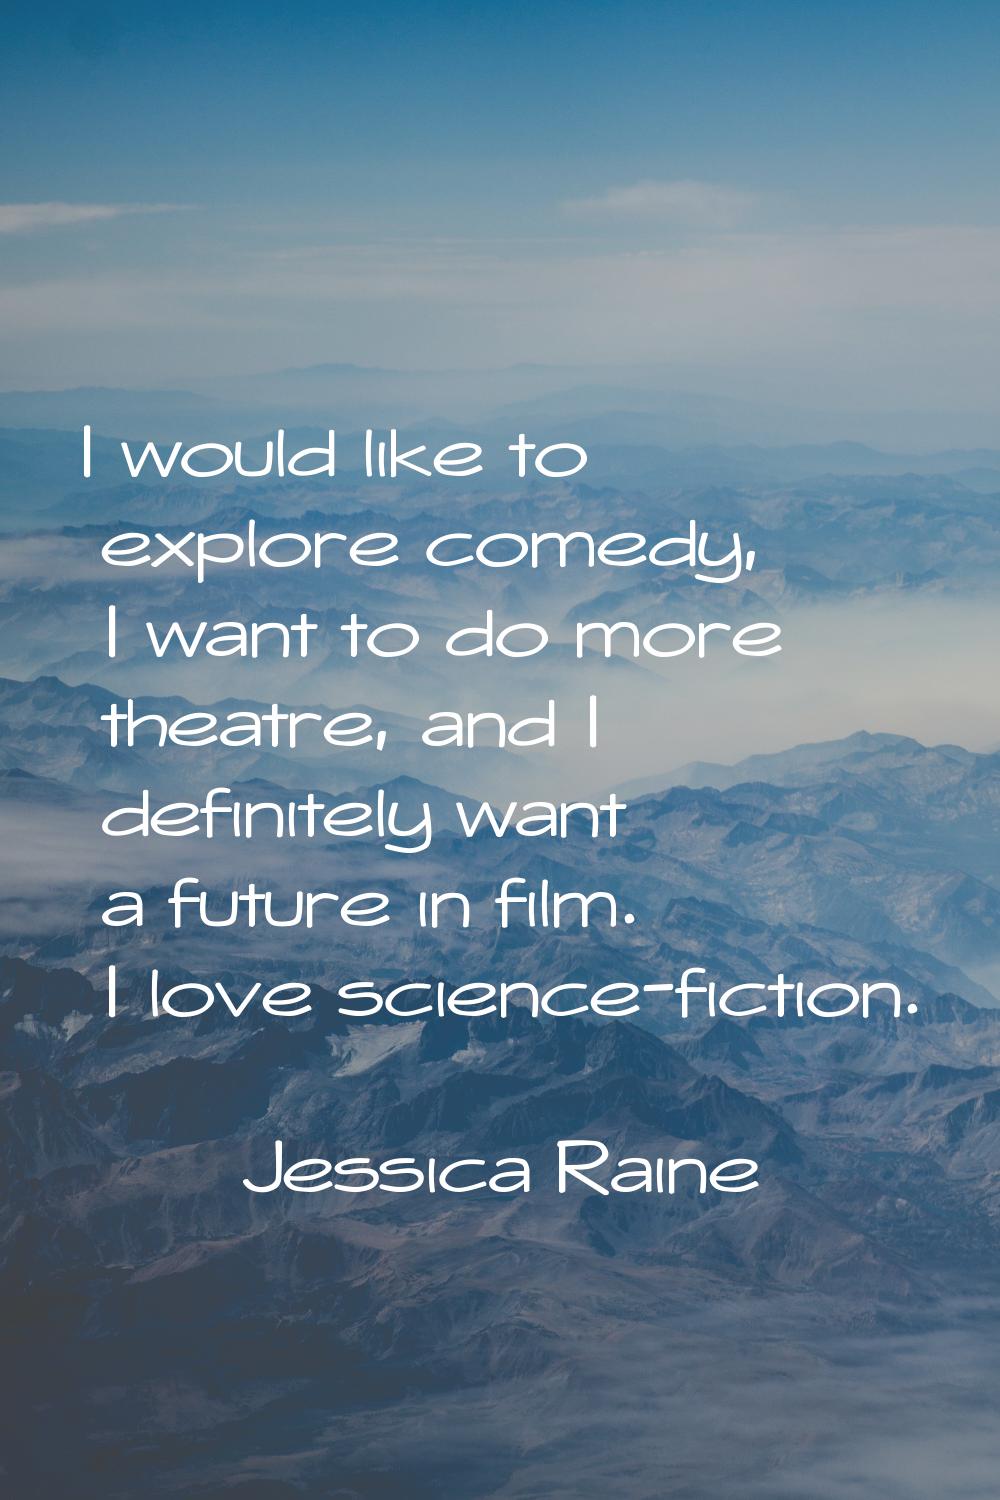 I would like to explore comedy, I want to do more theatre, and I definitely want a future in film. 